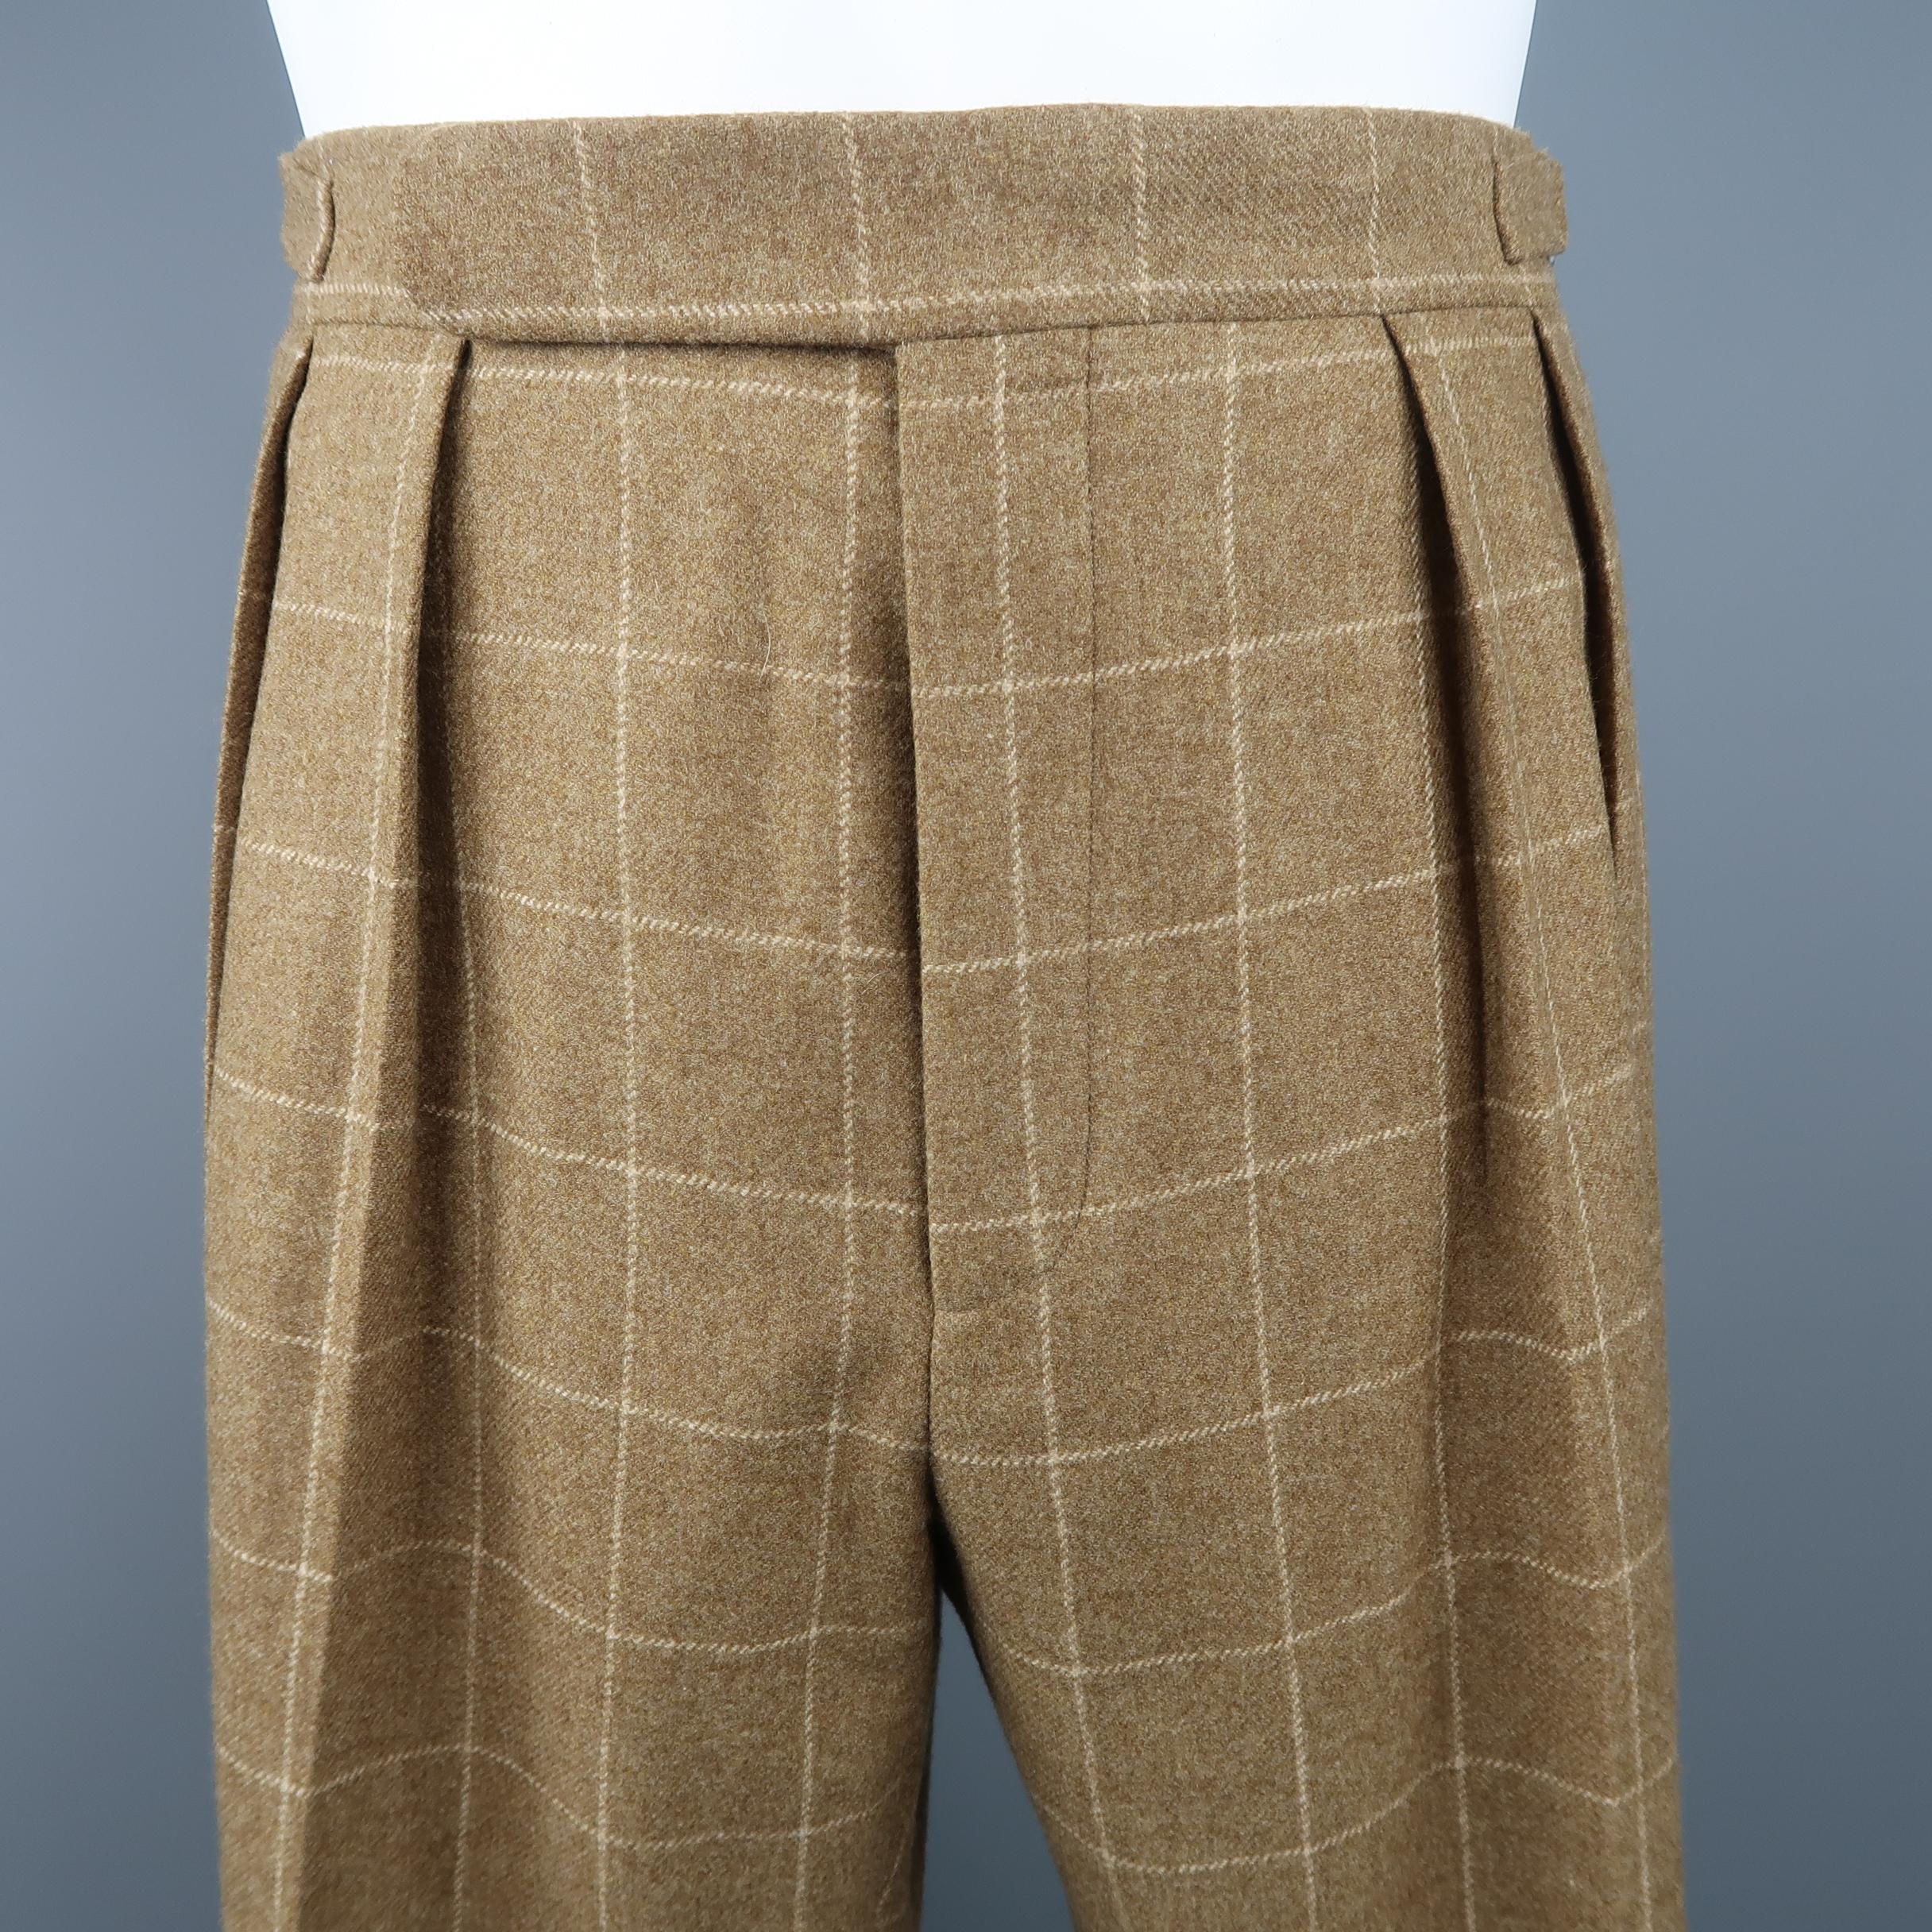 POLO RALPH LAUREN trousers come in tan windowpane wool with a pleated front, side tabs, and cuffed hem. Made in Italy.

Retai: $395
Good Pre-Owned Condition.
Marked: 34
 
Measurements:
 
Waist: 34 in.
Rise: 11.5 in.
Inseam: 30 in.